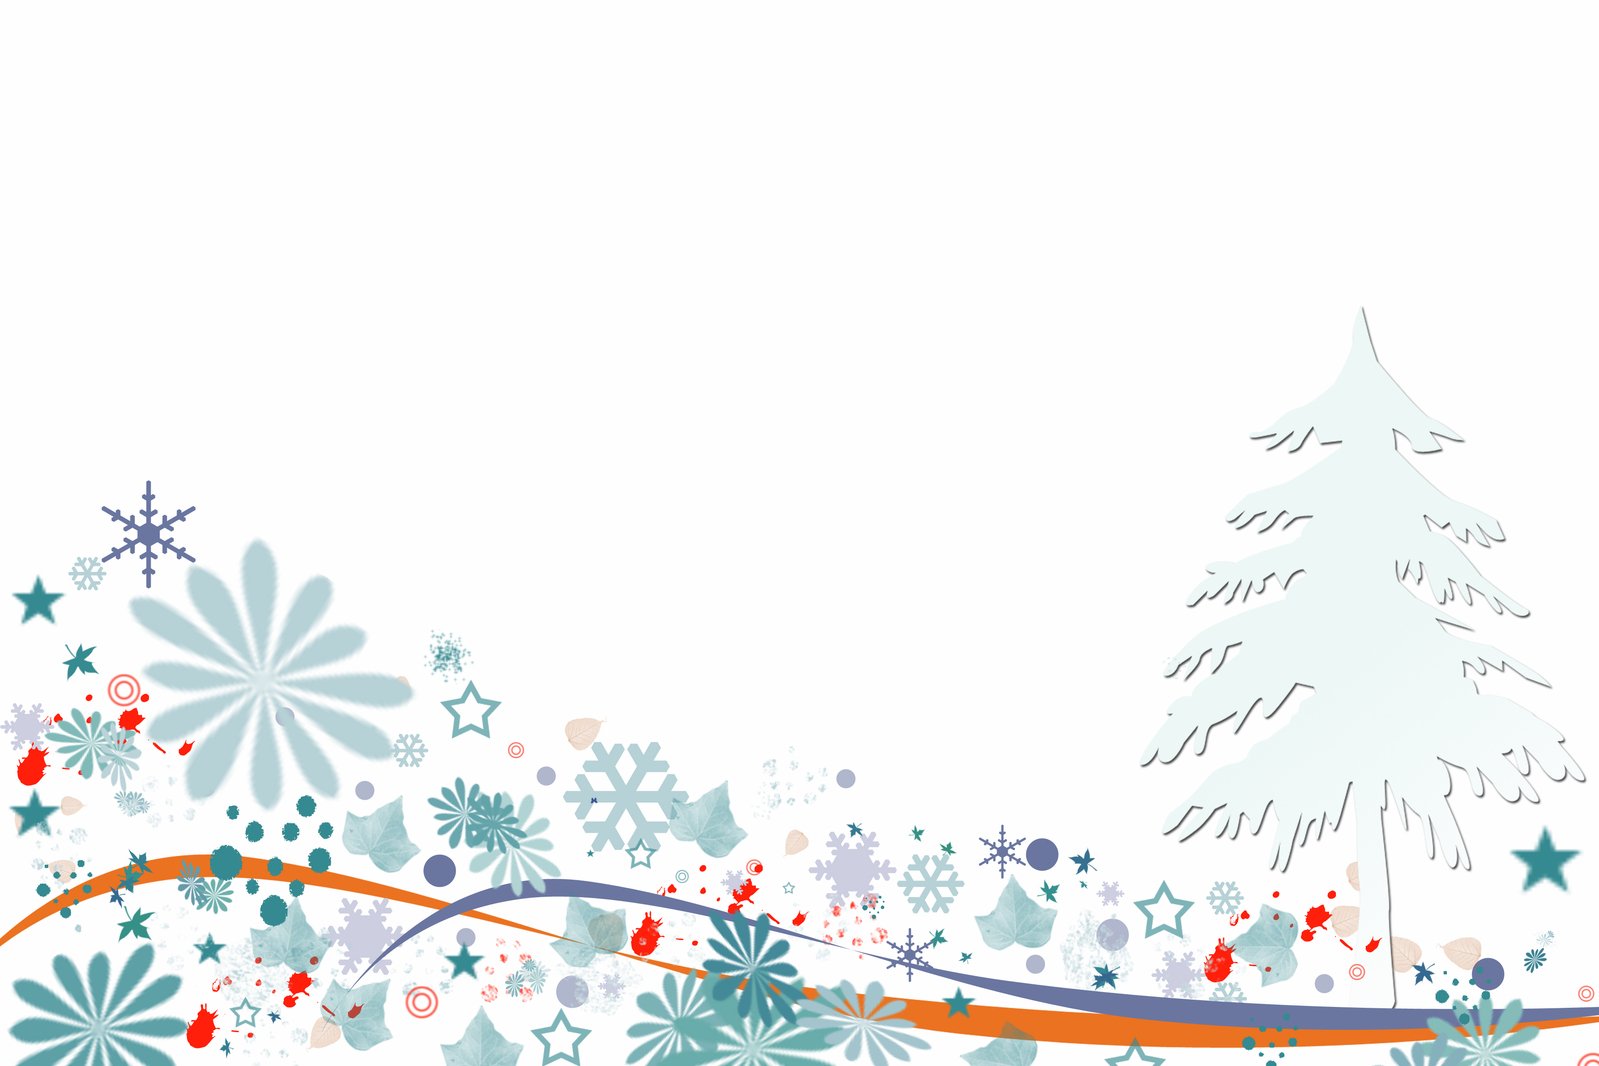 an illustration of snow and snowflakes on white background